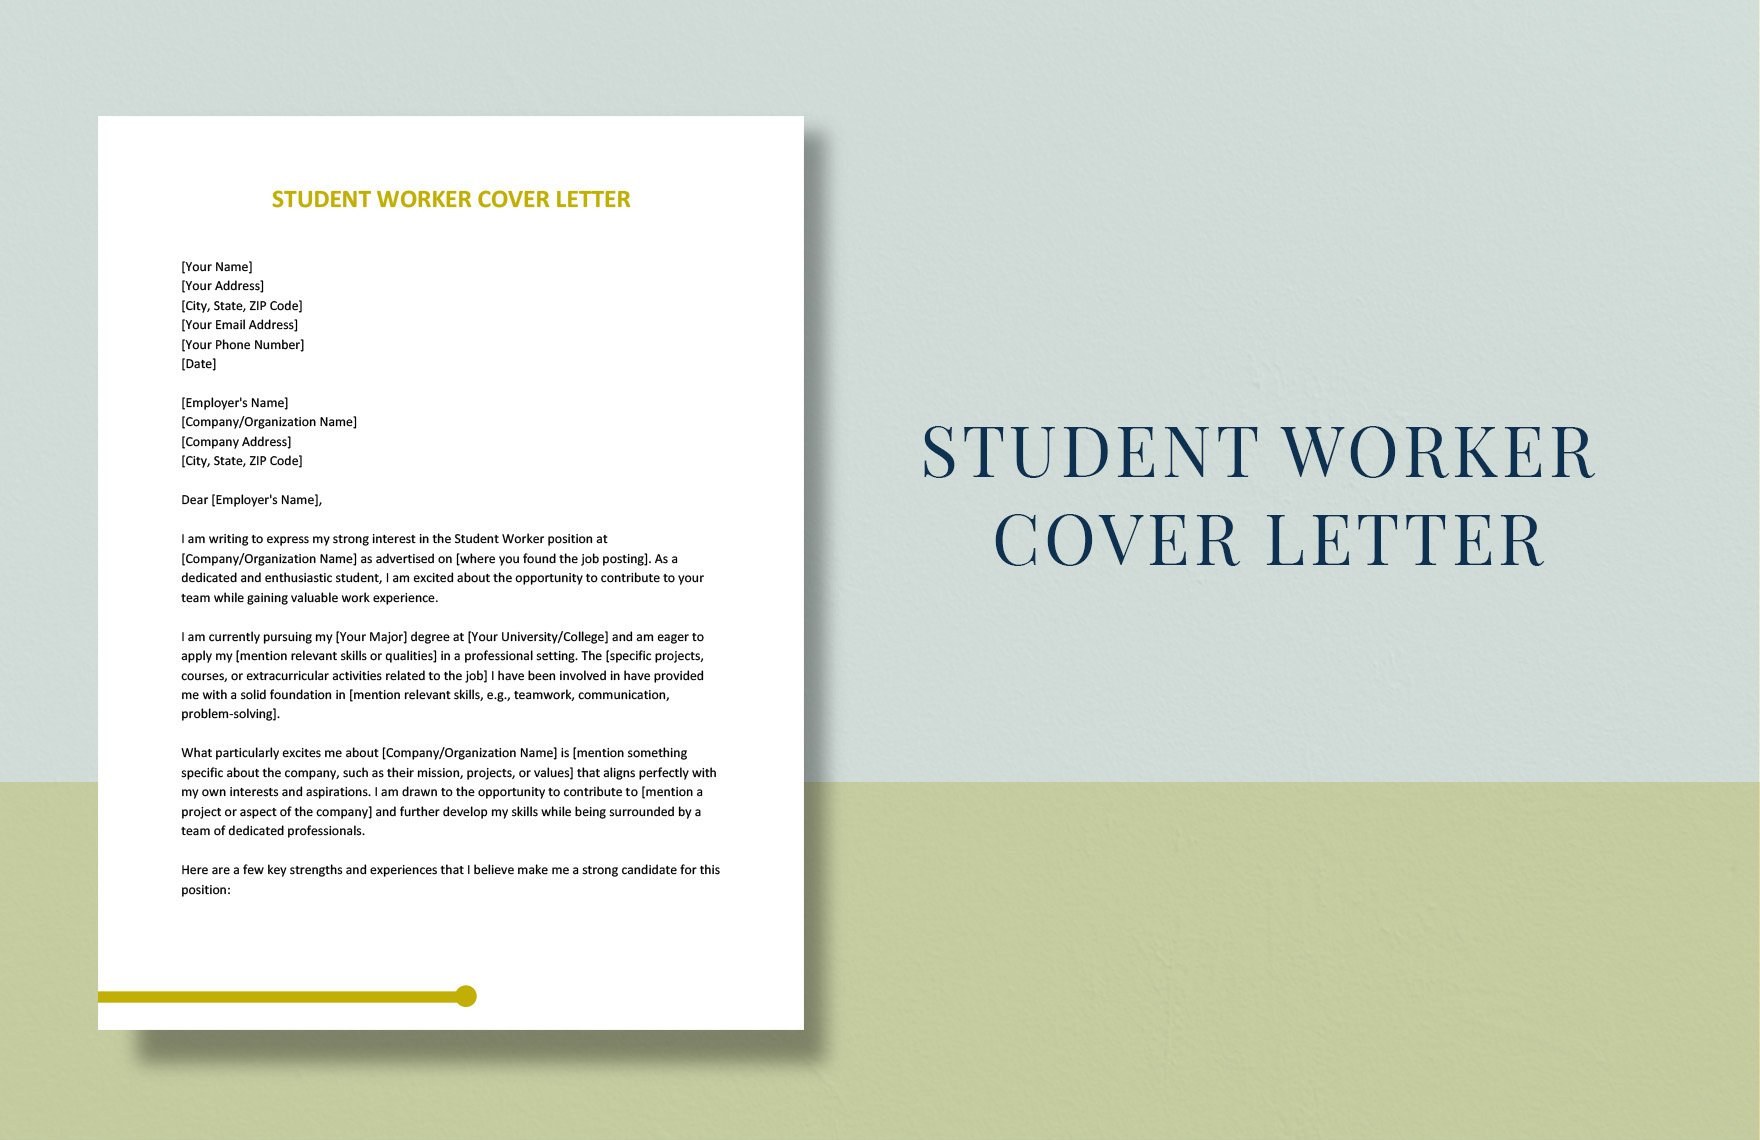 Student Worker Cover Letter